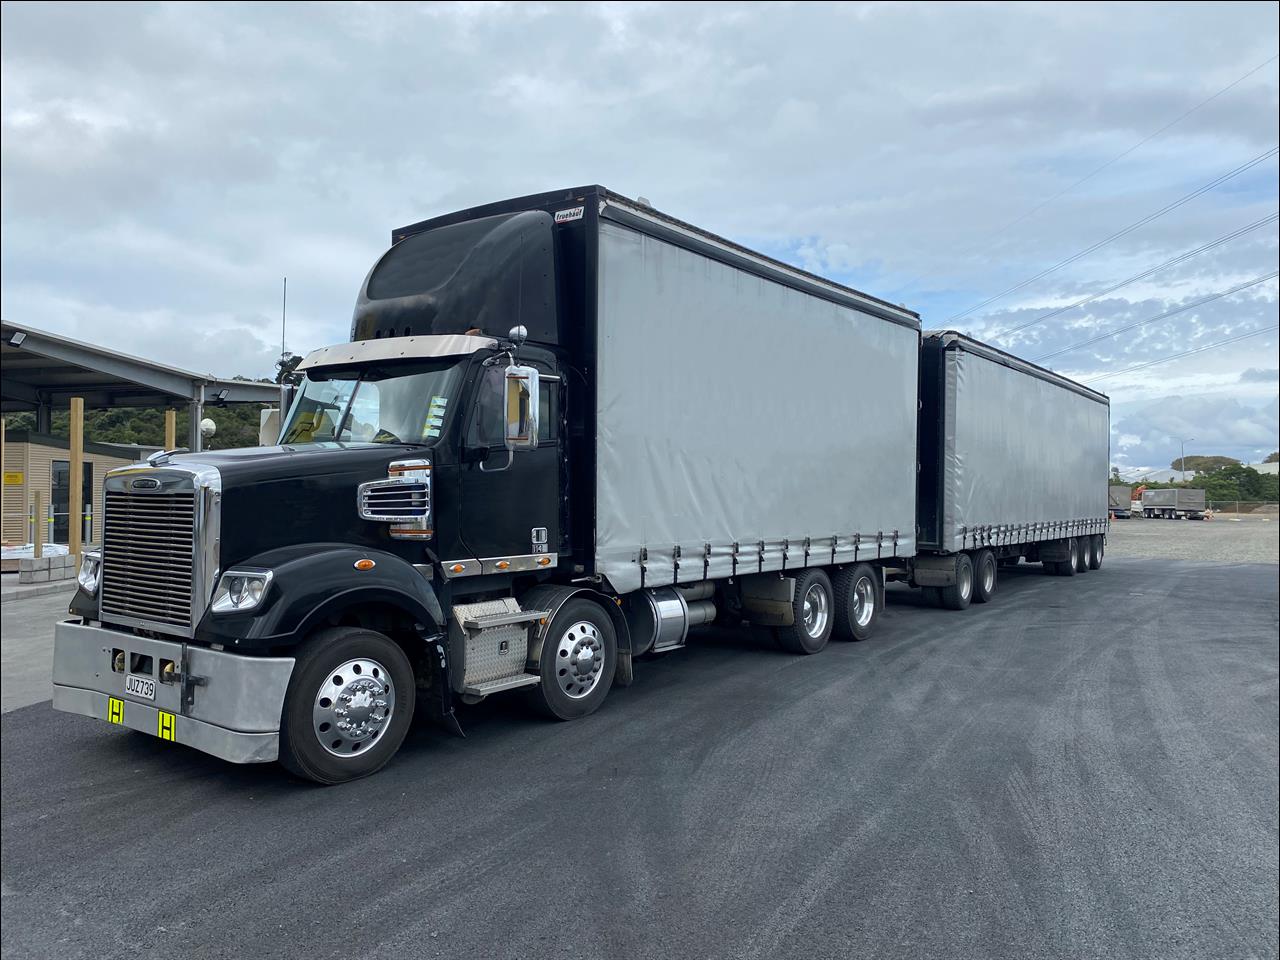 2016 Freightliner CORONADO - 8x4 Curtainsider Complete with 5 Axle Trailer